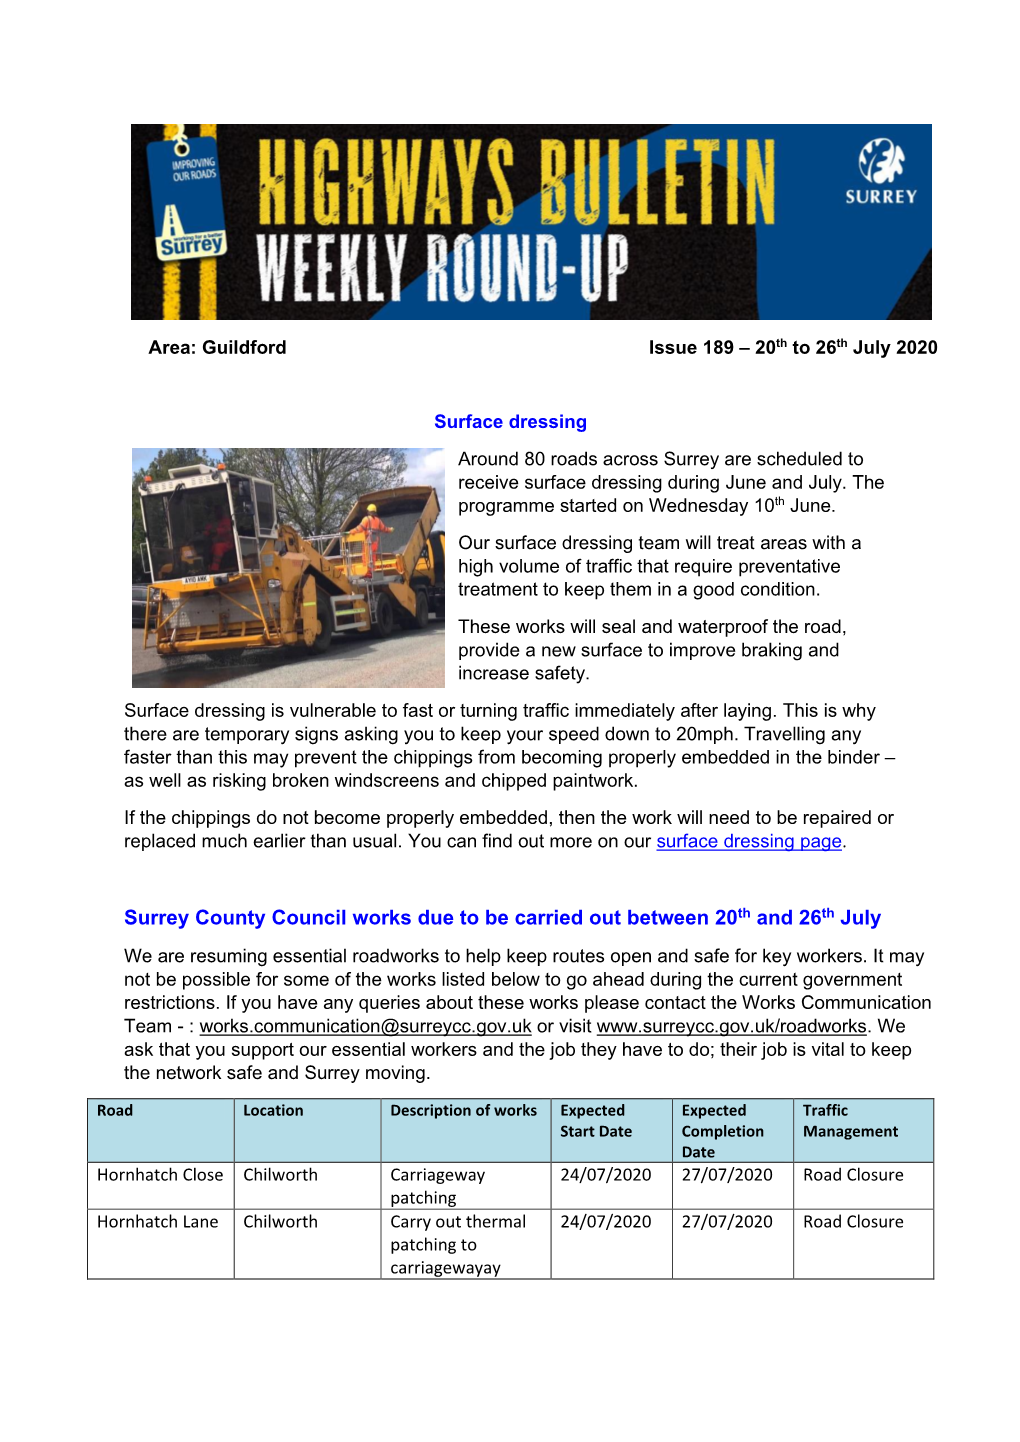 Guildford Highways Bulletin from 20